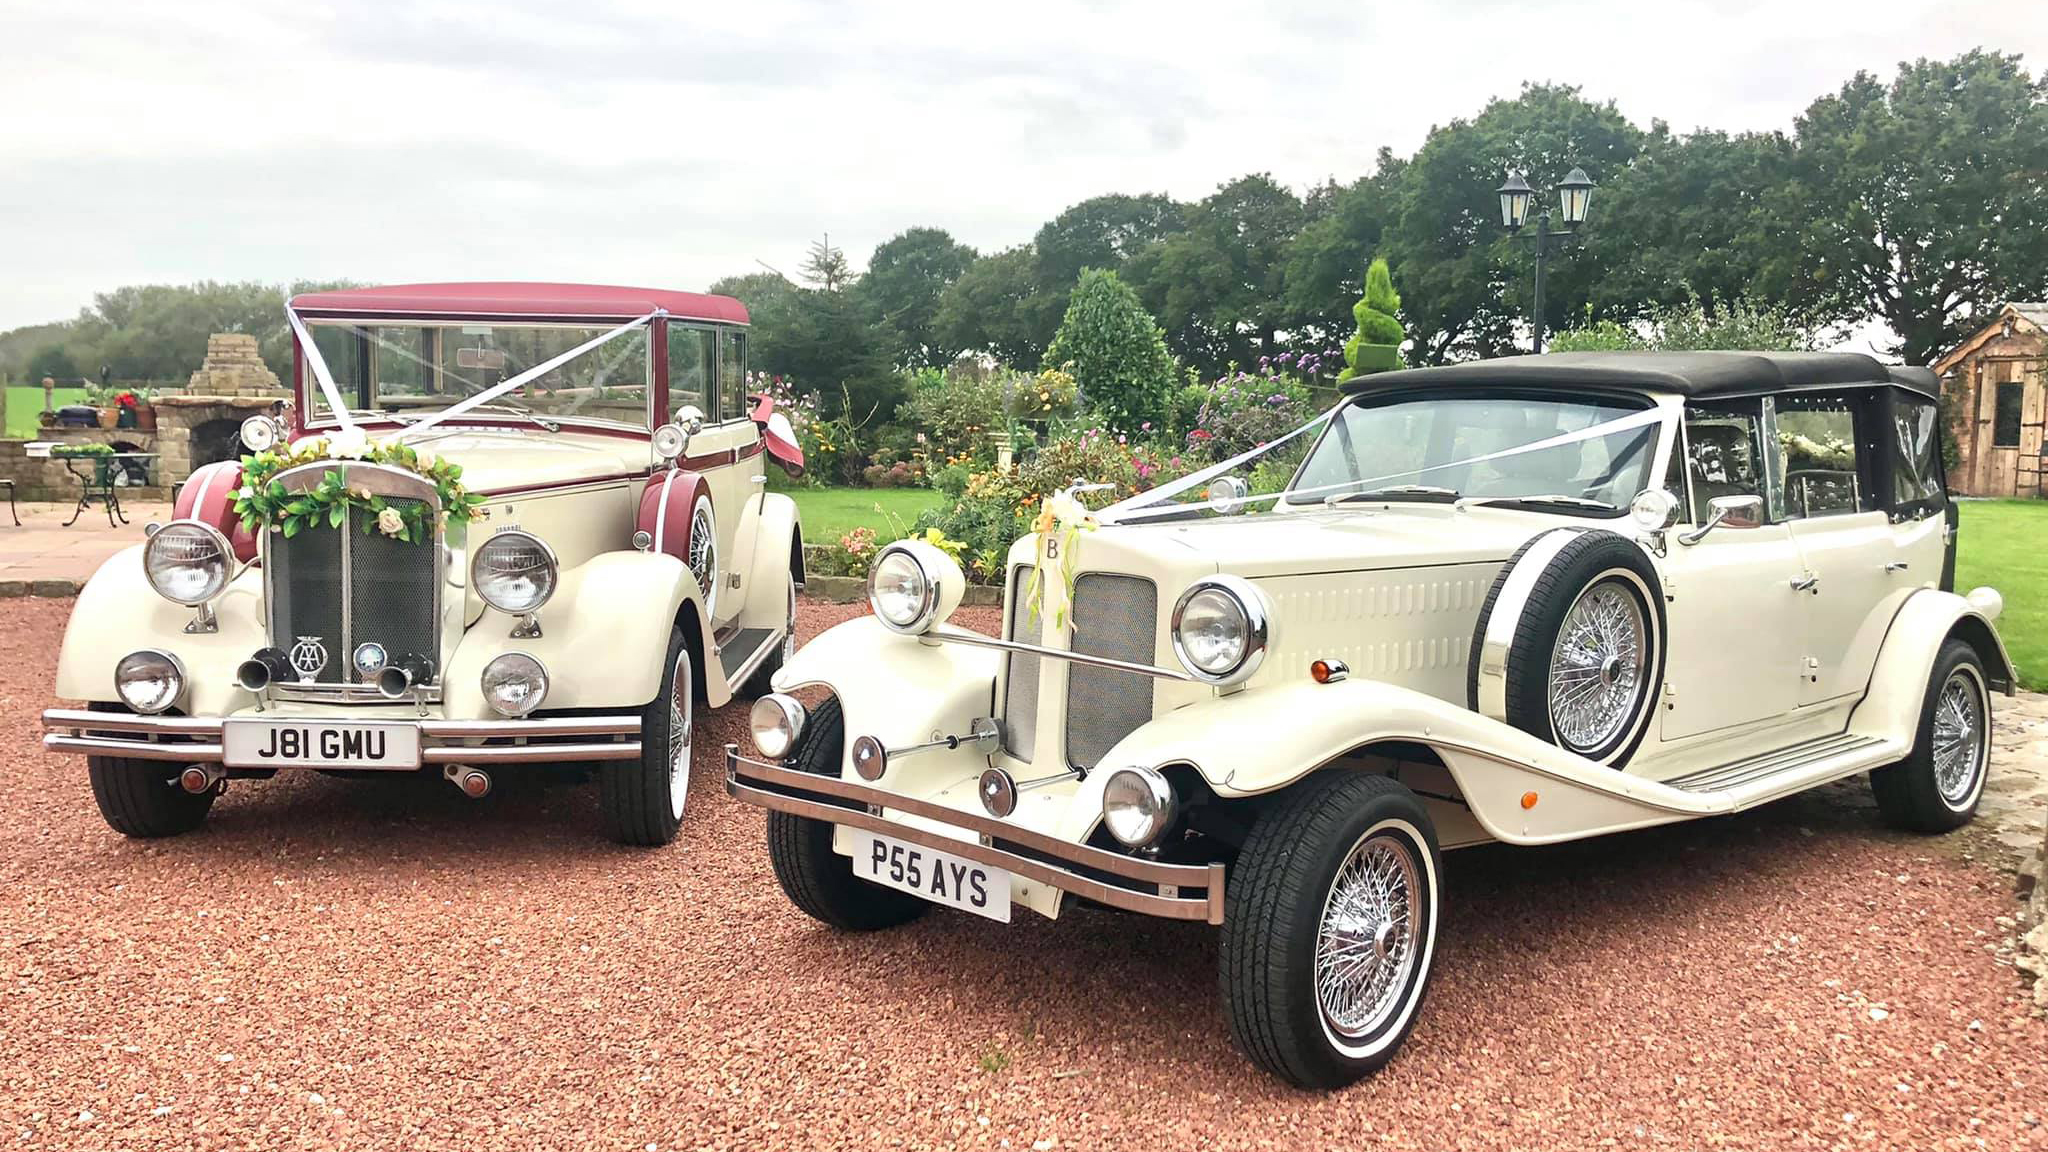 Two vintage wedding cars decorated with white ribbons and bows at a local Preston wedding. Both vehicles are parked side-by-side